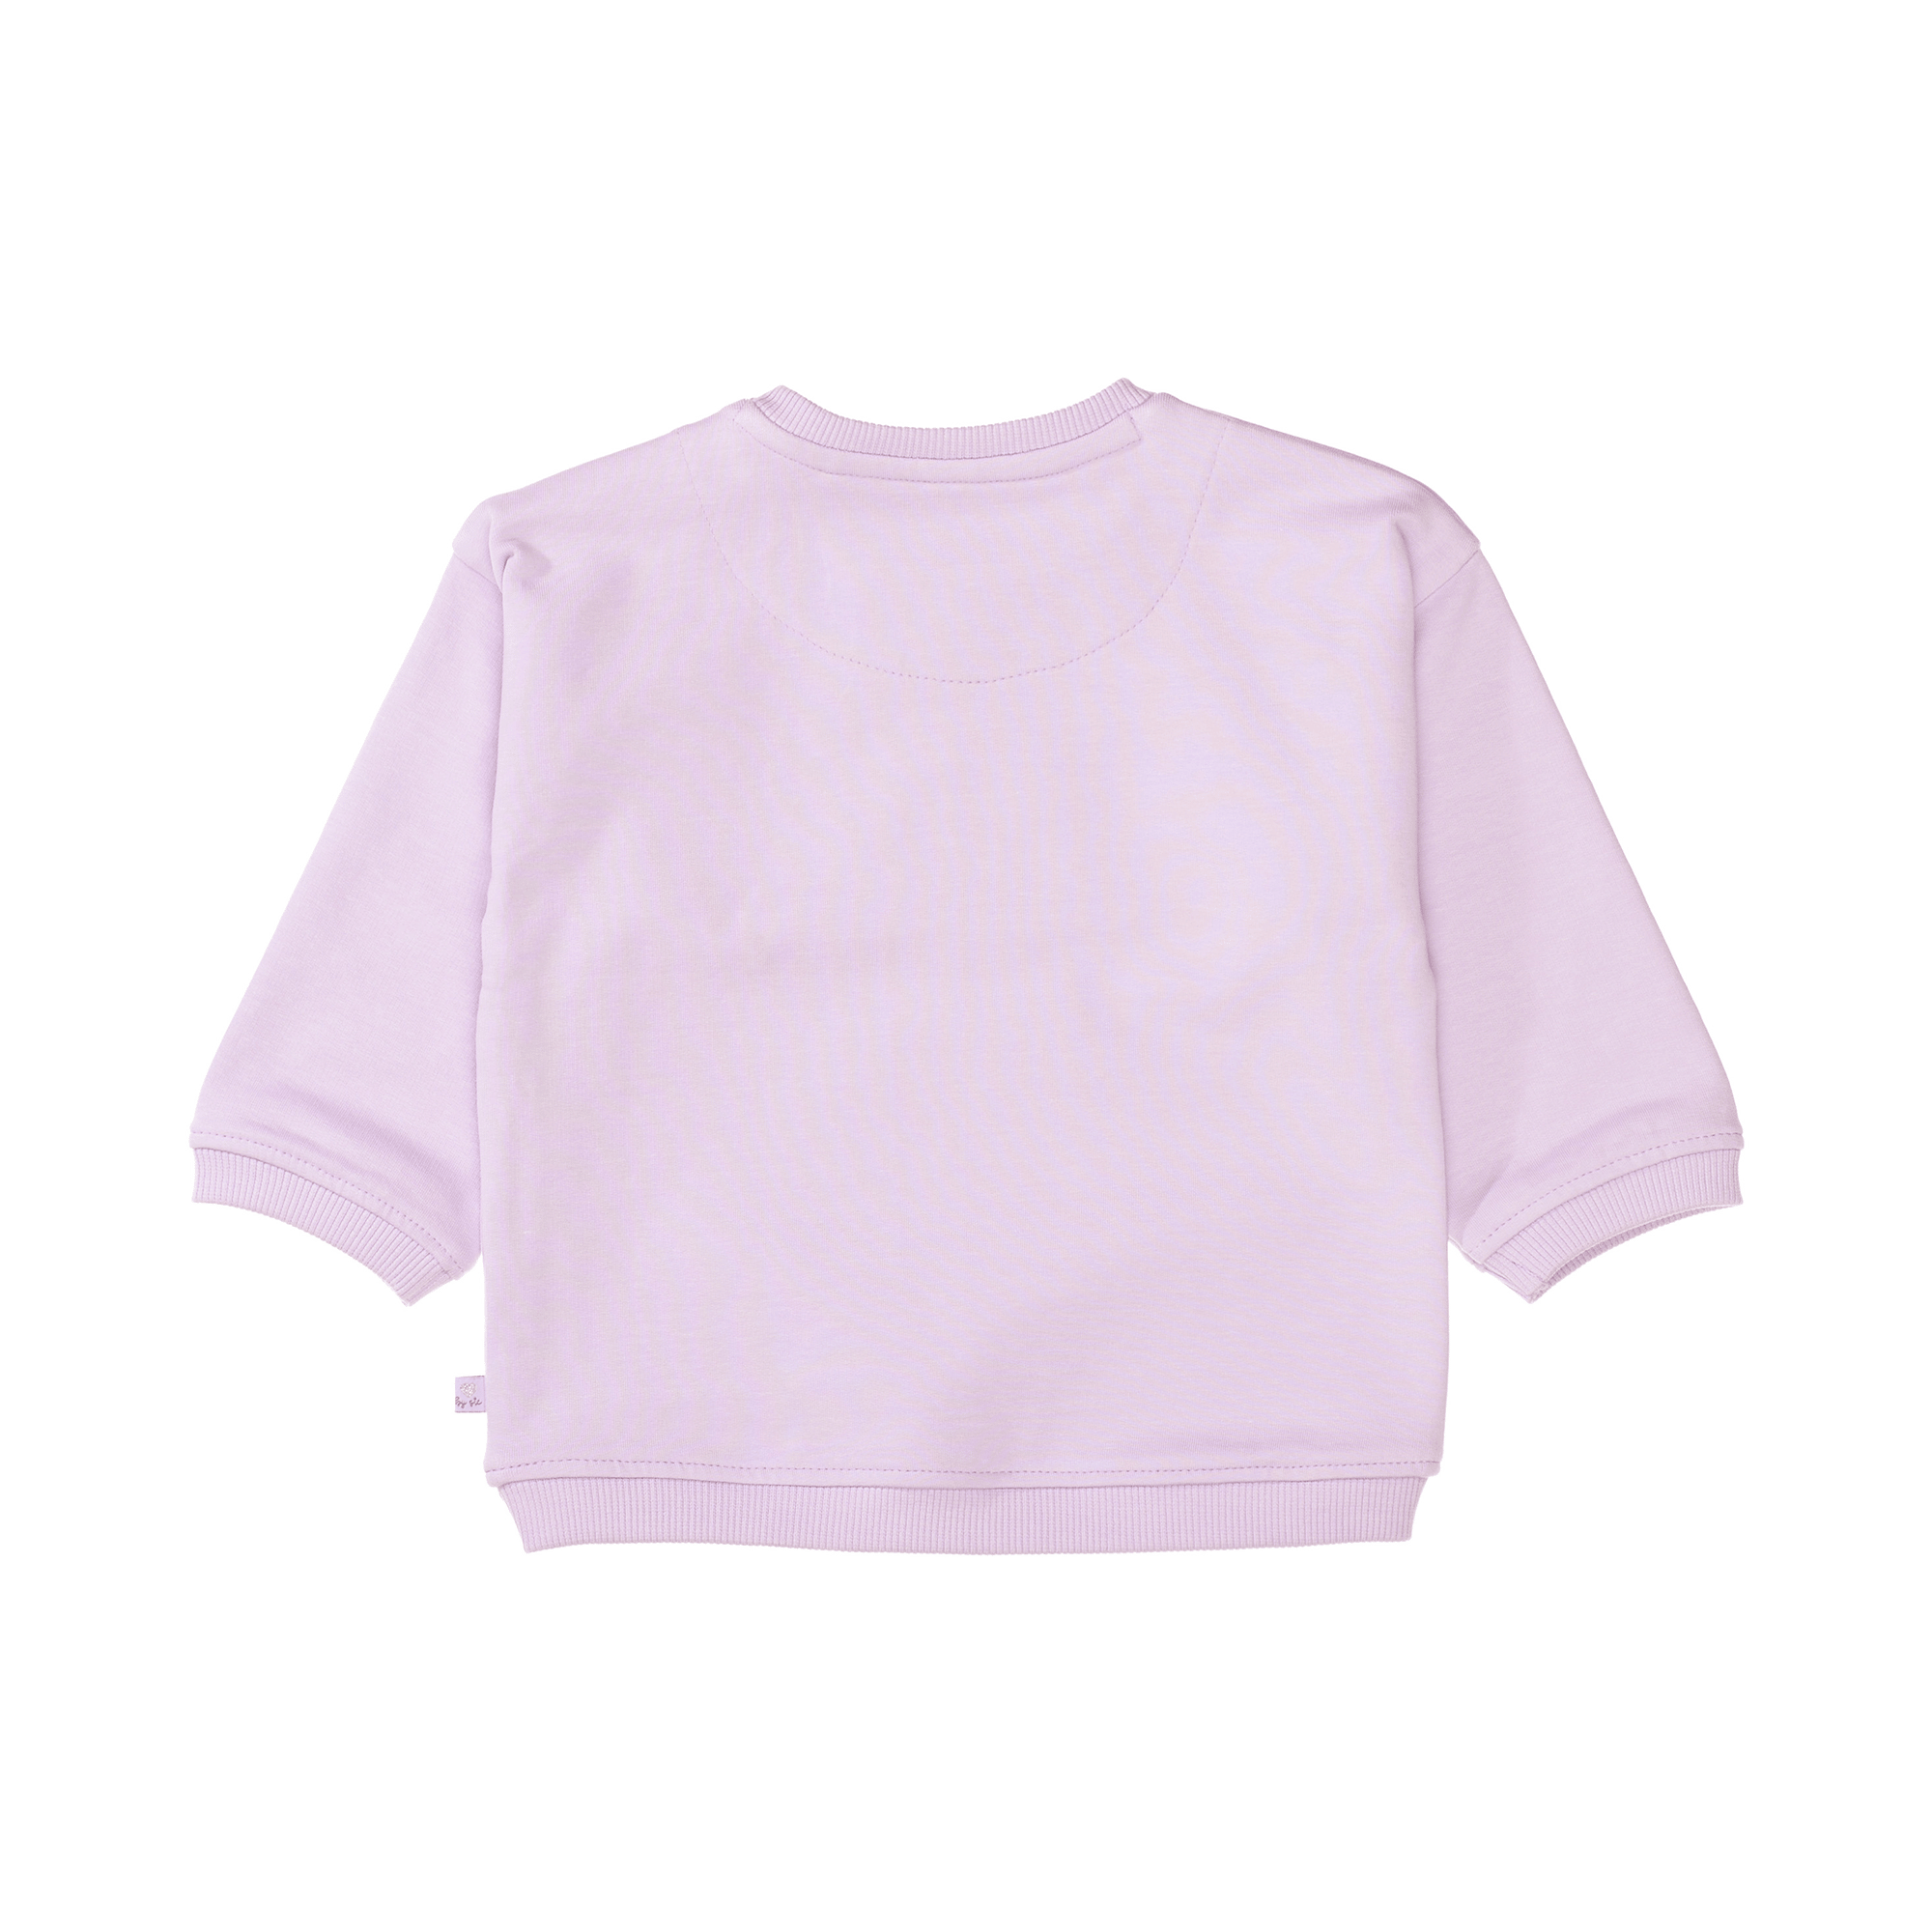 Sweatshirt Good Times Forever STACCATO Lila M2000585458300 2